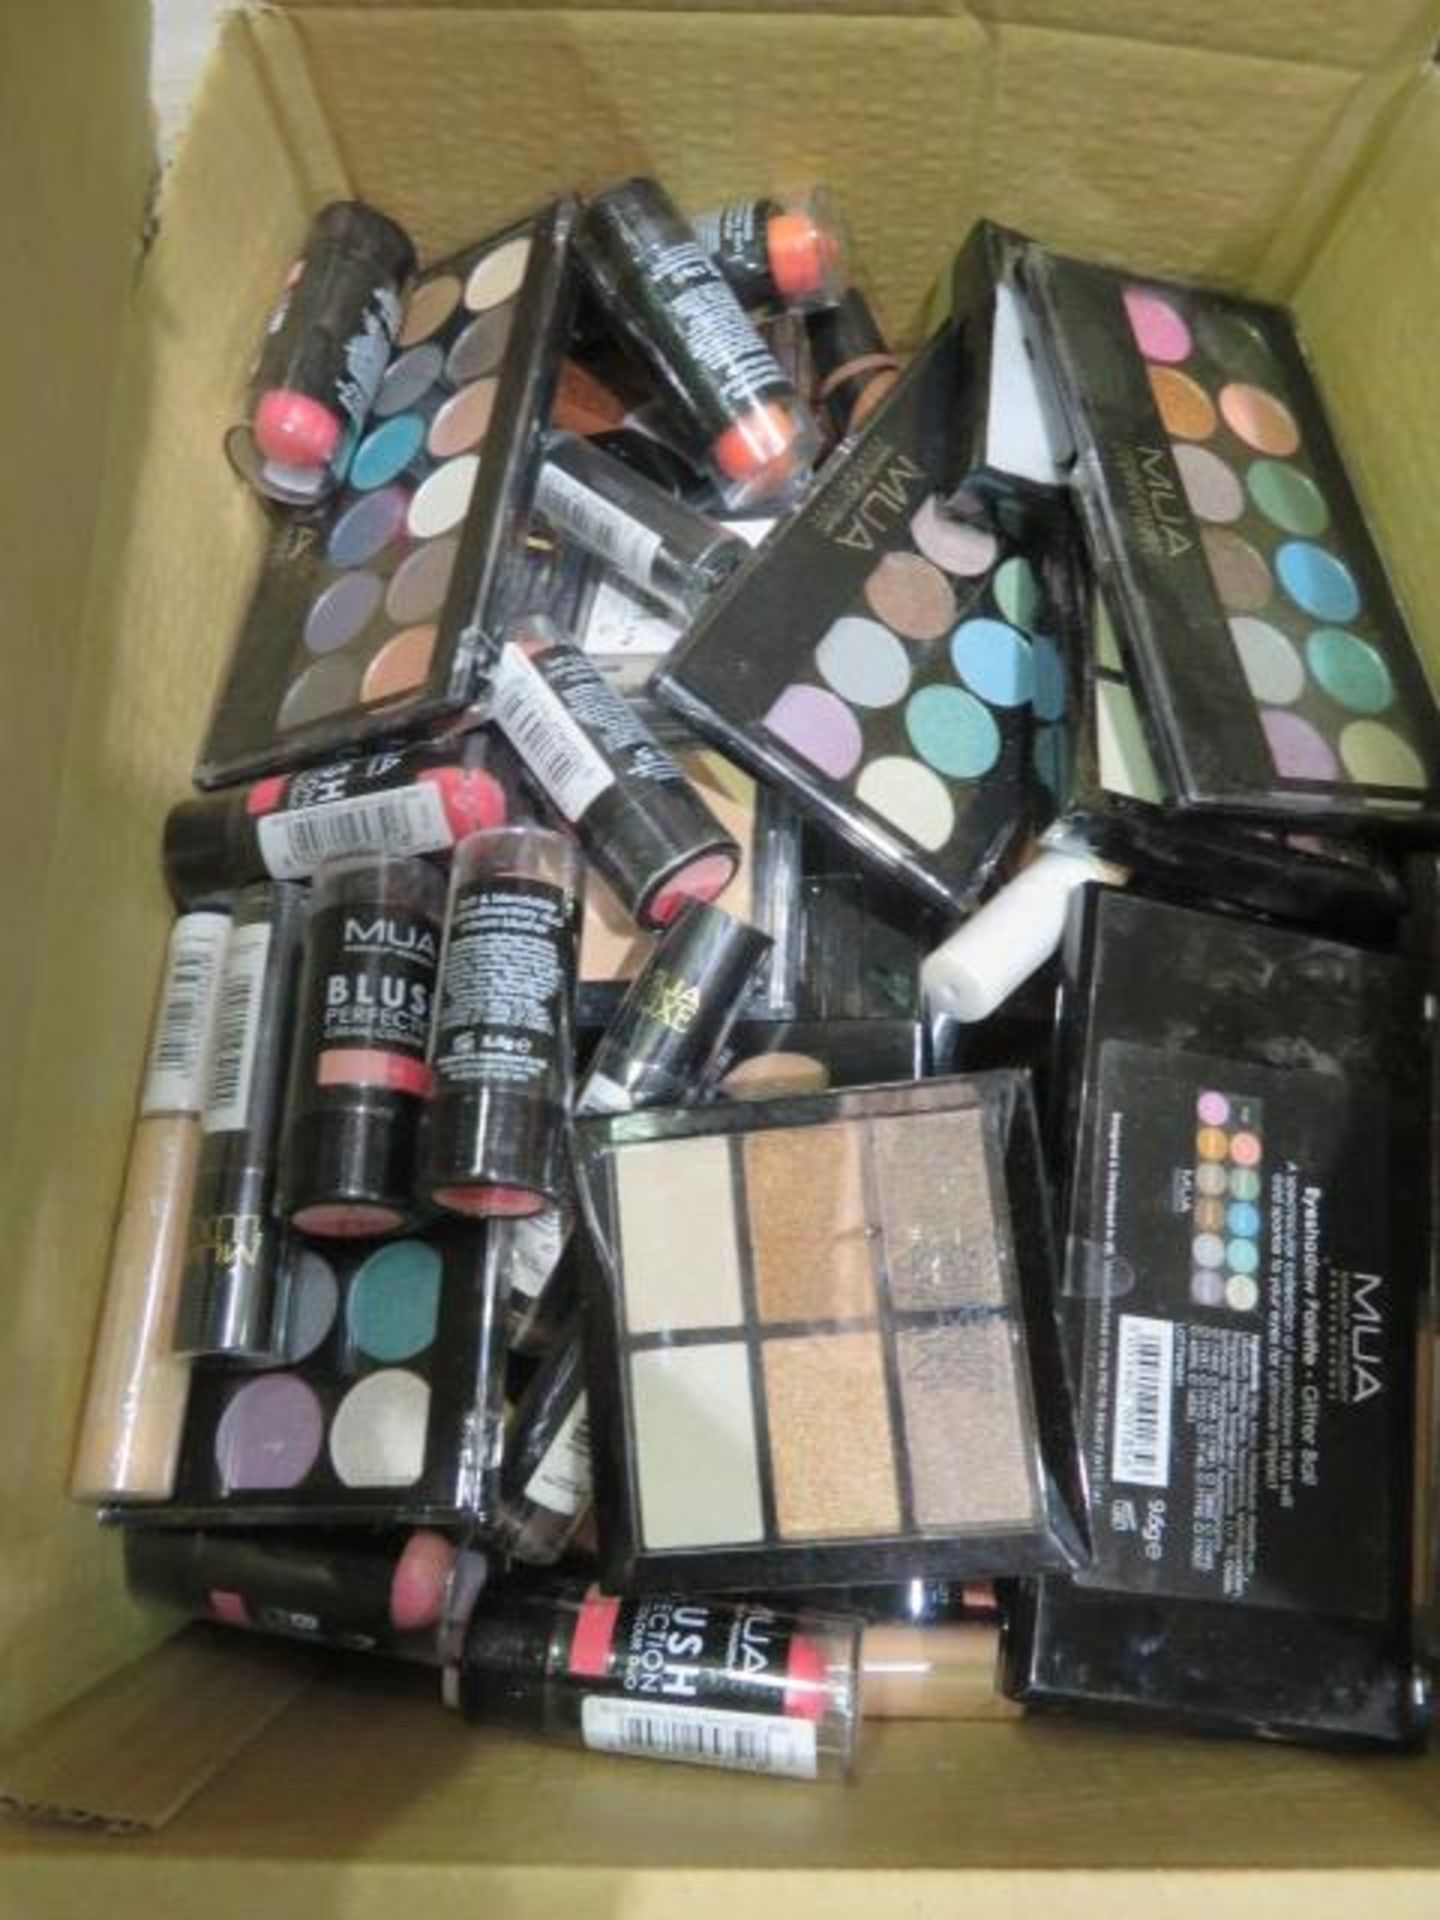 (Z28) Circa. 200 items of various new make up acadamy make up to include: glitter ball eye shad... - Image 3 of 3